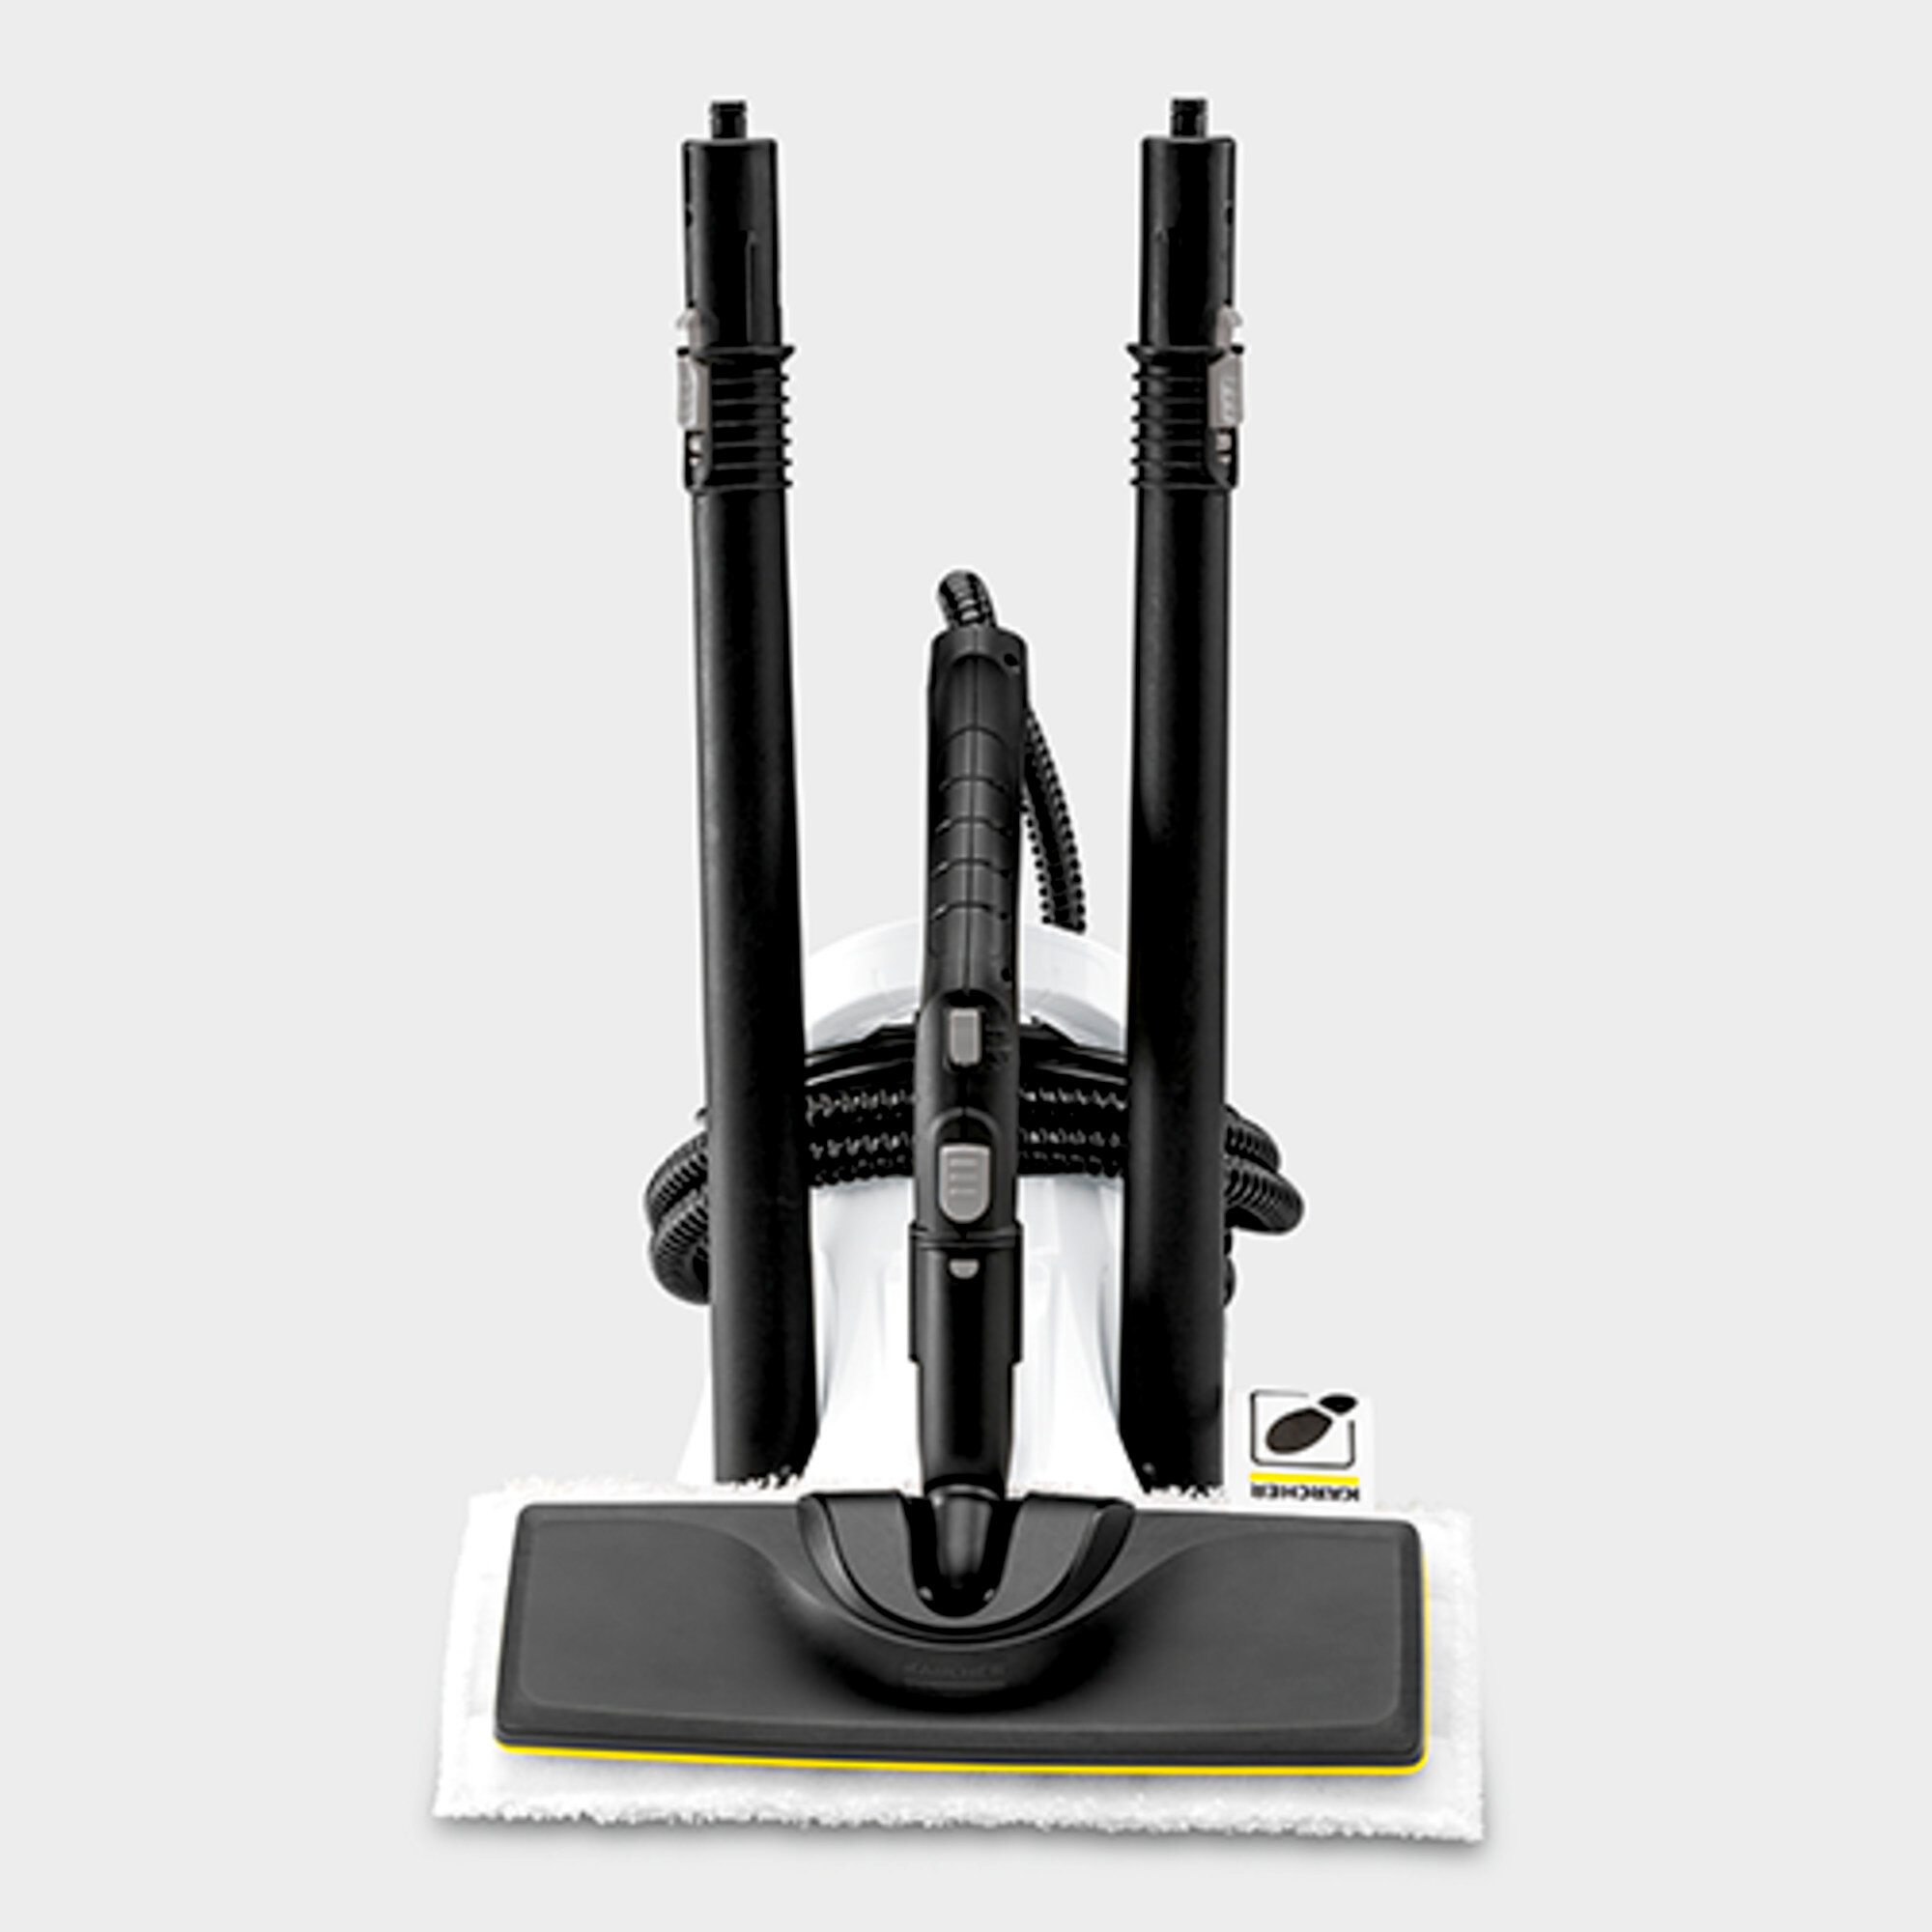 Steam cleaner SC 2 Deluxe EasyFix Premium: Orderly accessory storage and parking position